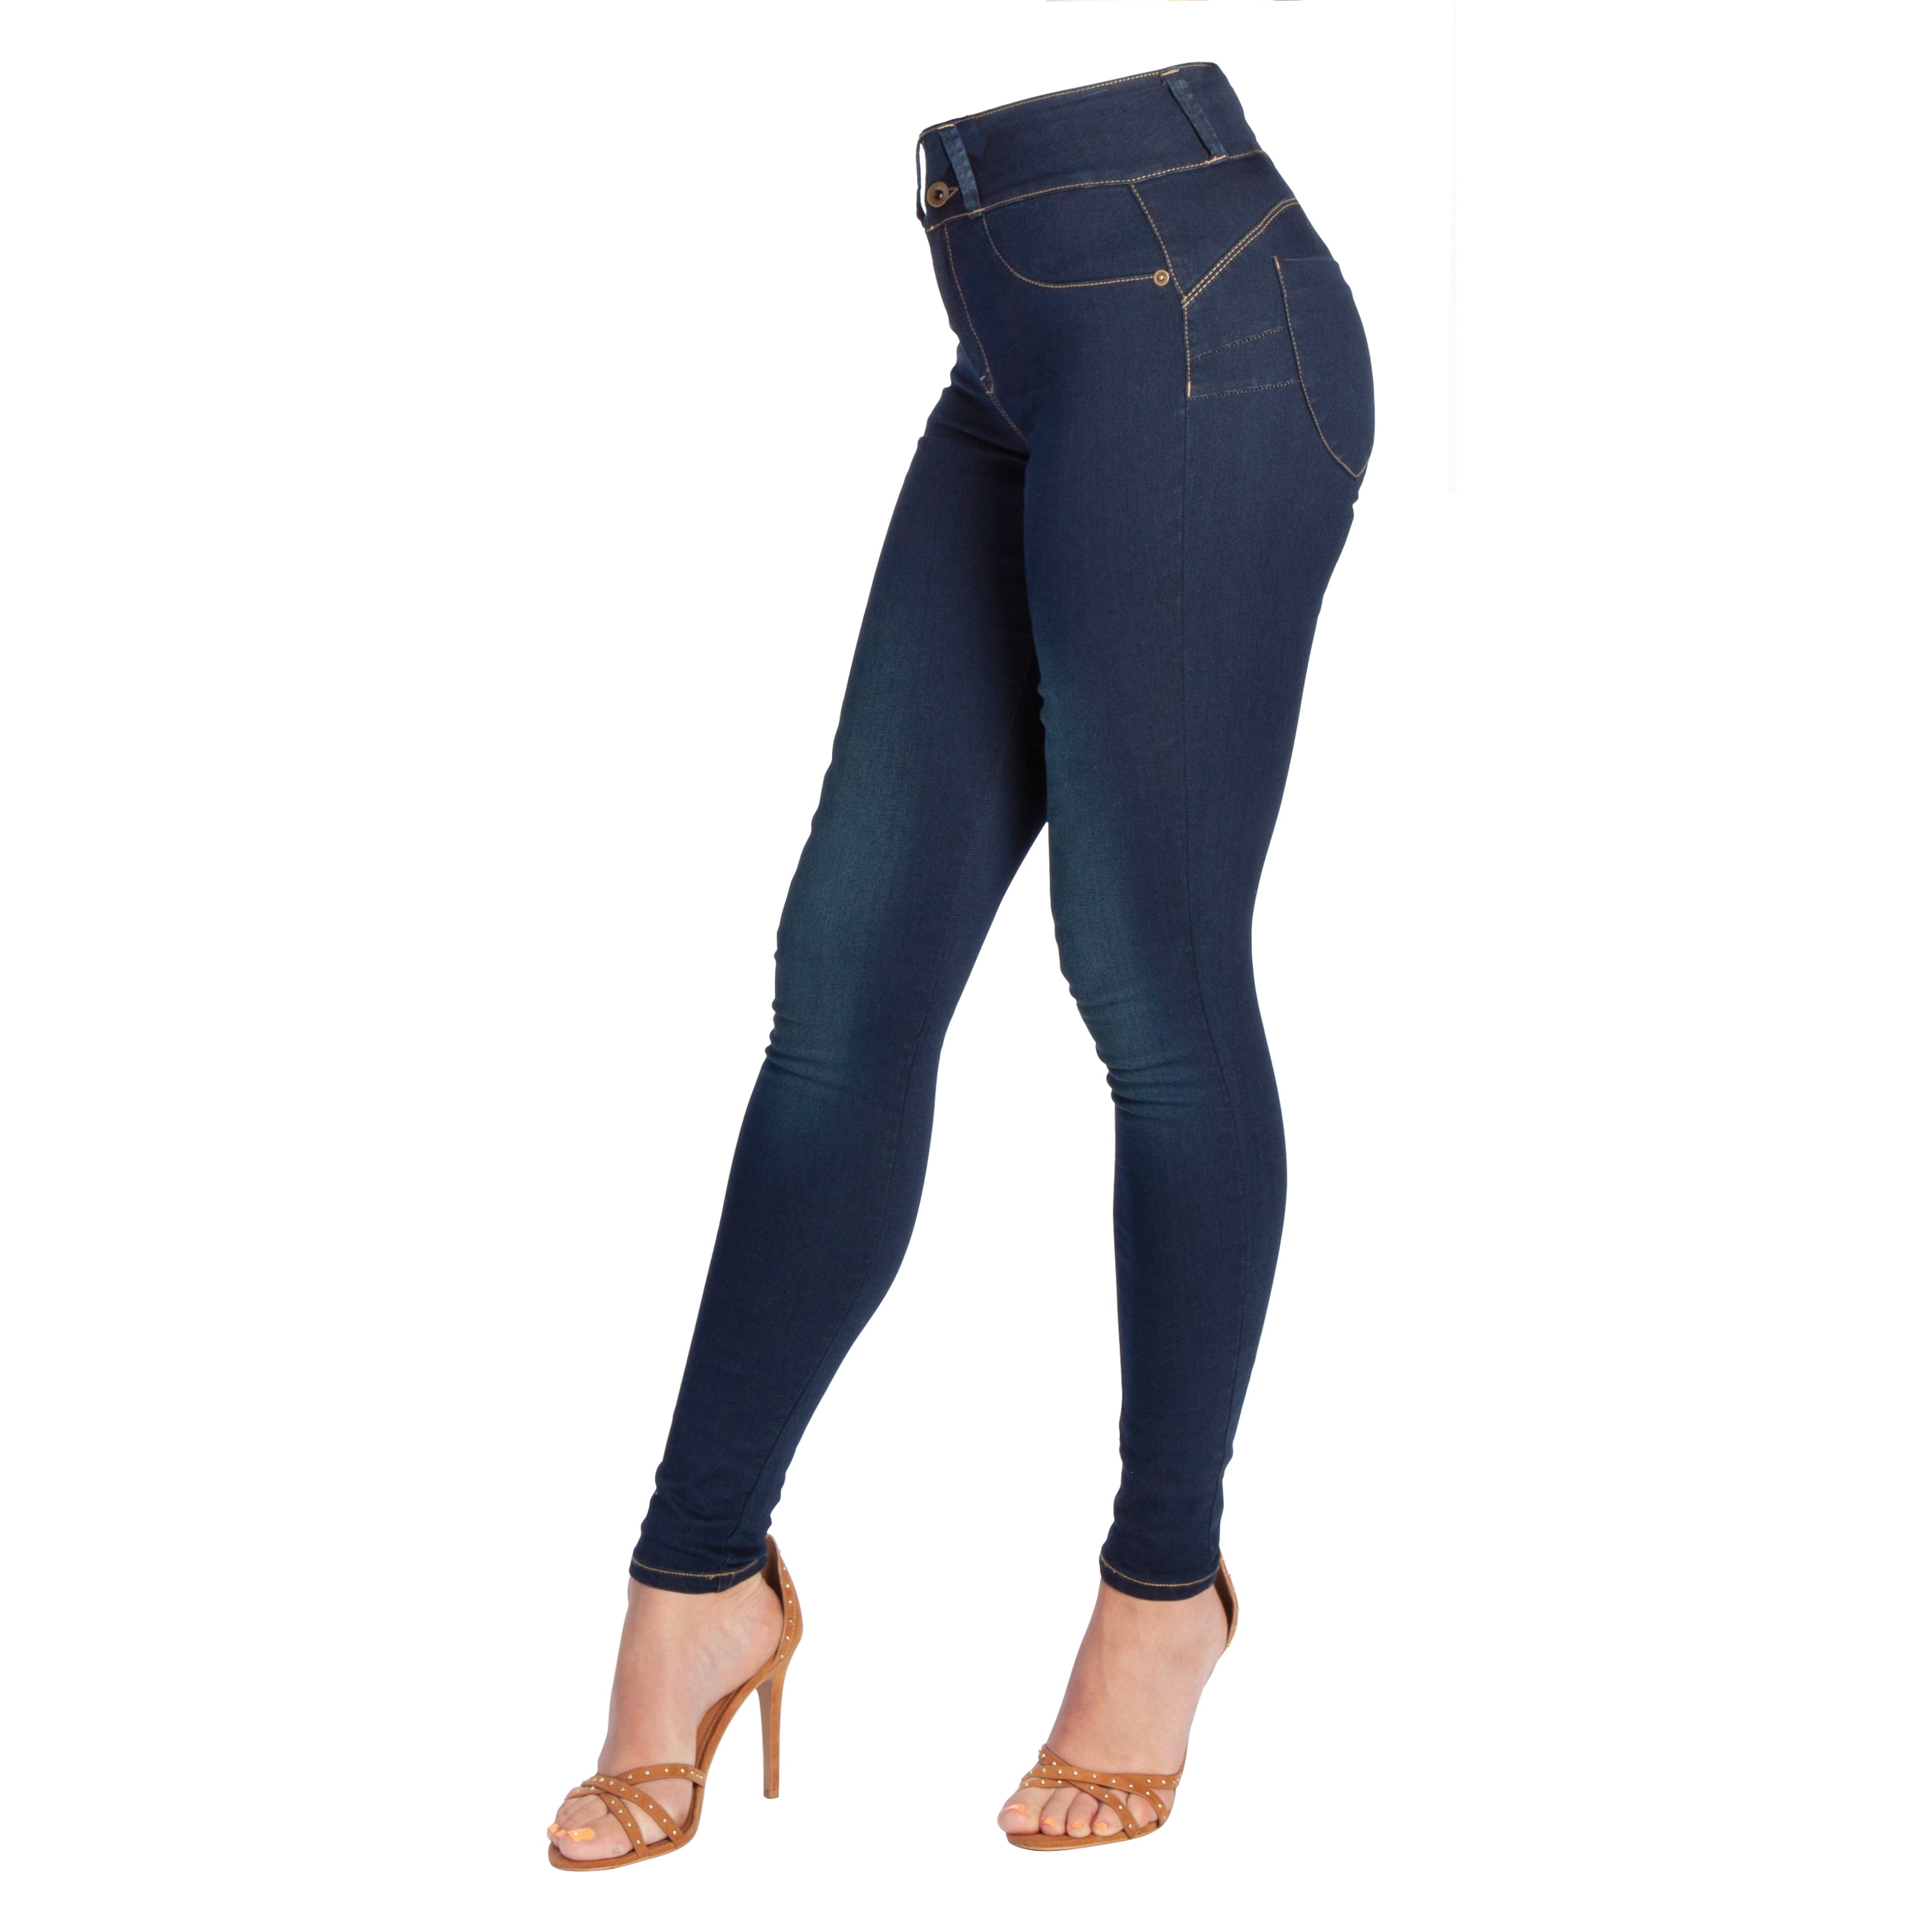 my fit jeans amazon